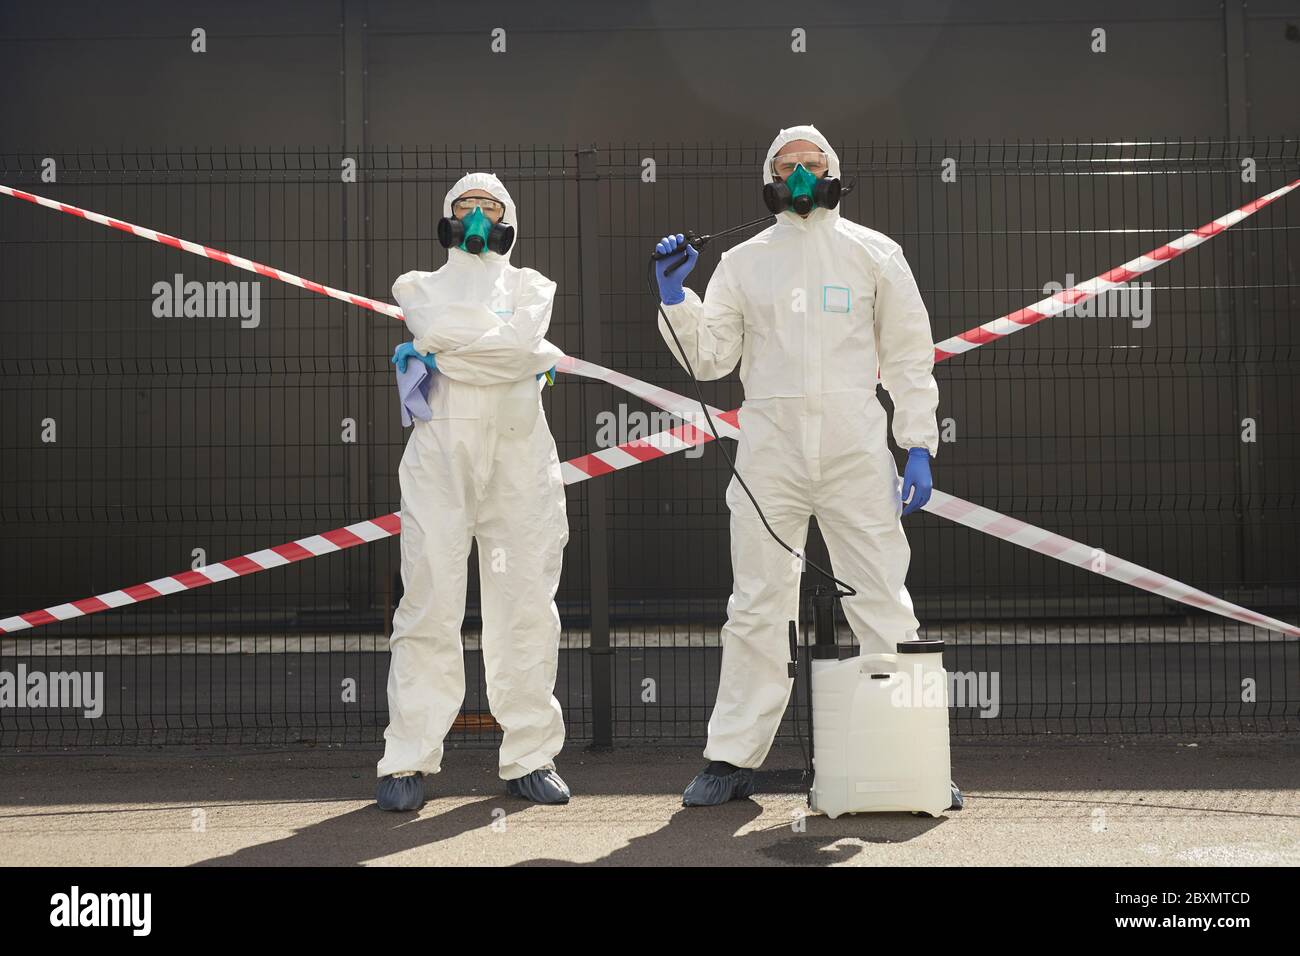 Full length portrait of two workers wearing hazmat suits holding disinfection gear while standing outdoors with red caution tape in background Stock Photo